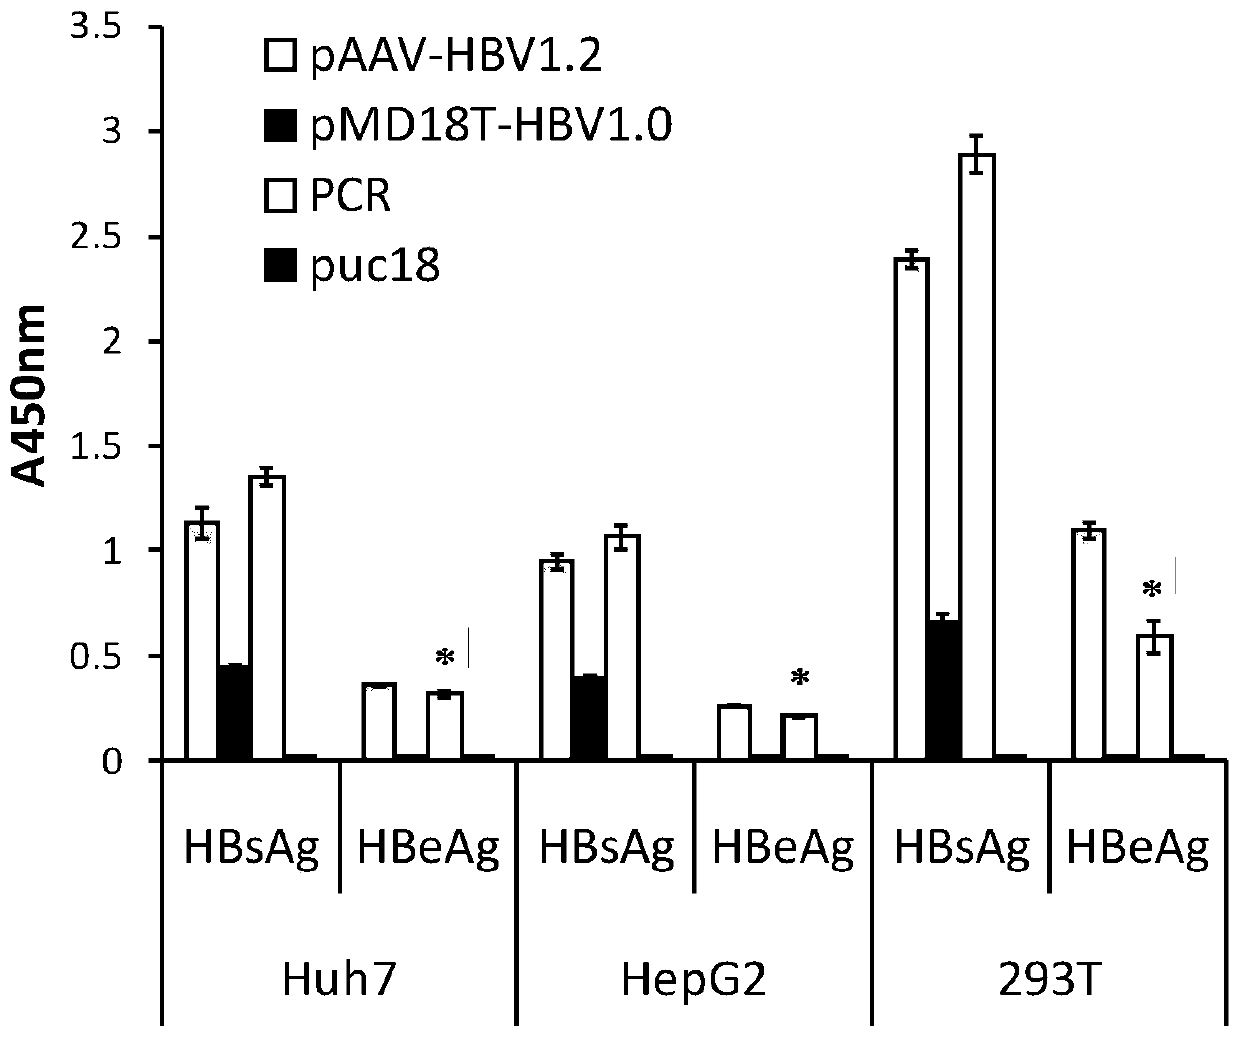 Construction method and application of a mouse model of HBV infection